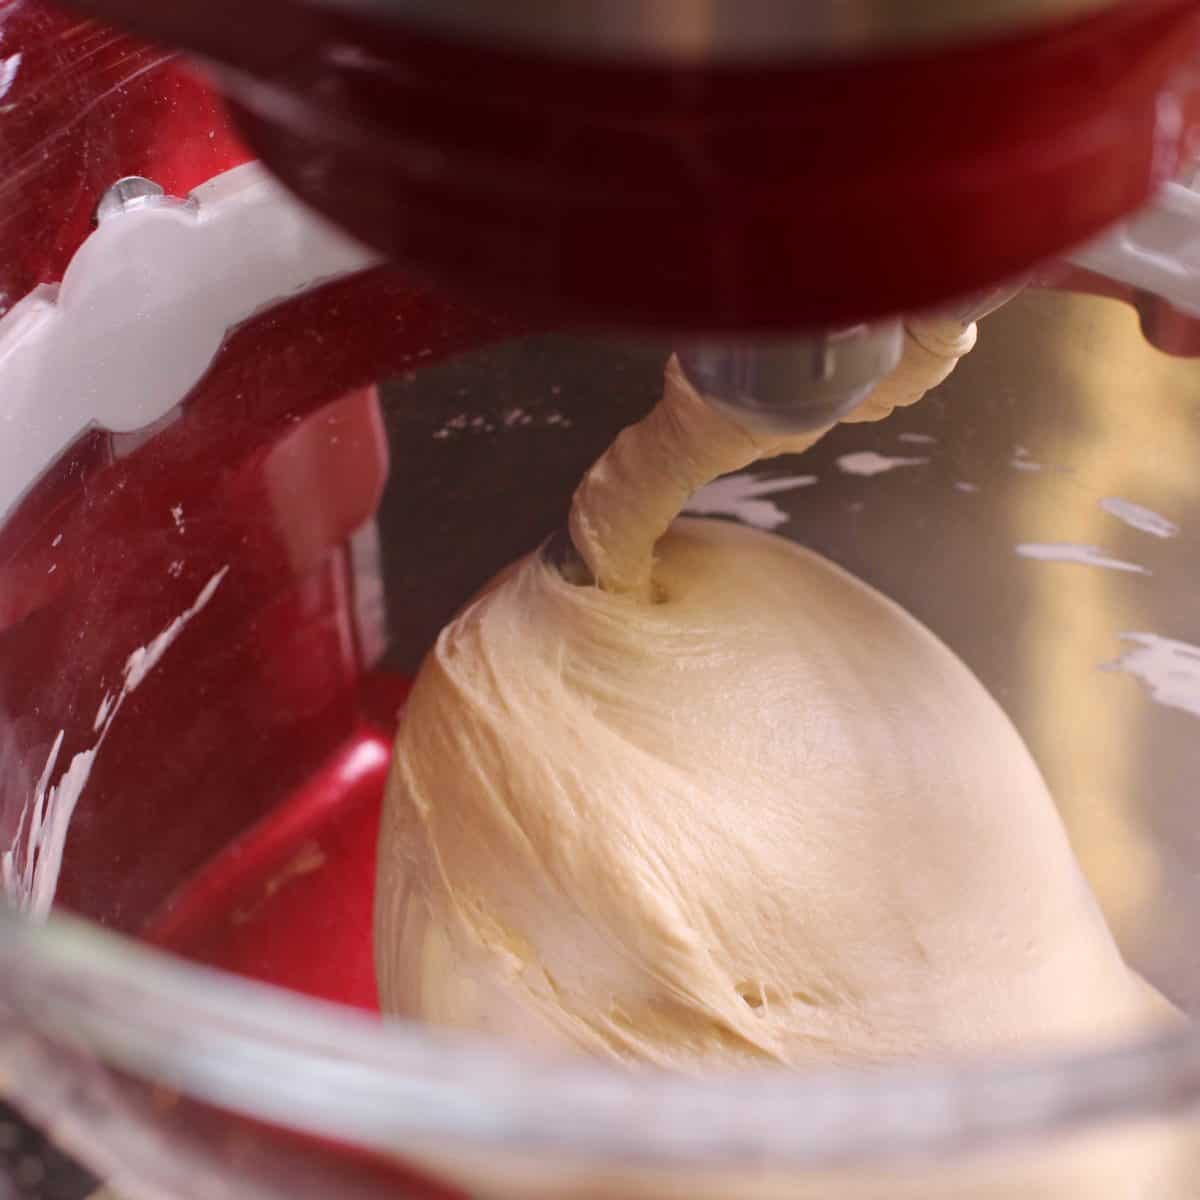 bread dough in a red electric stand mixer being mixed with a dough hook.